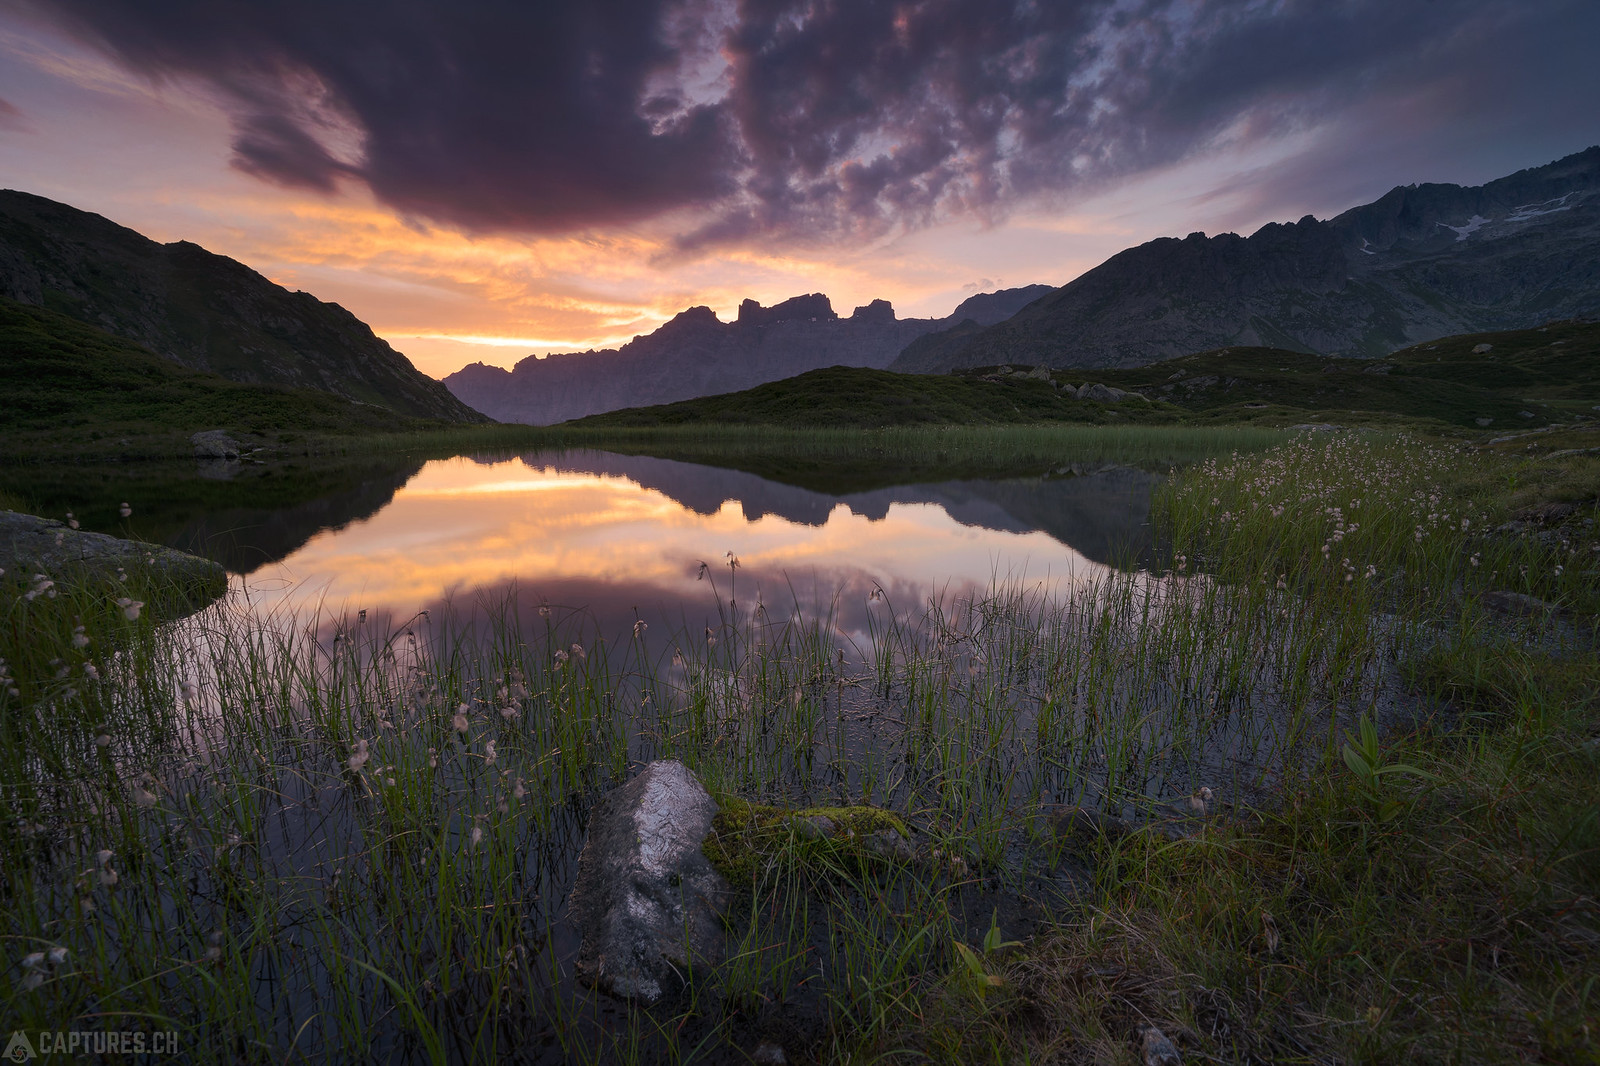 After the sunset - Sustenpass